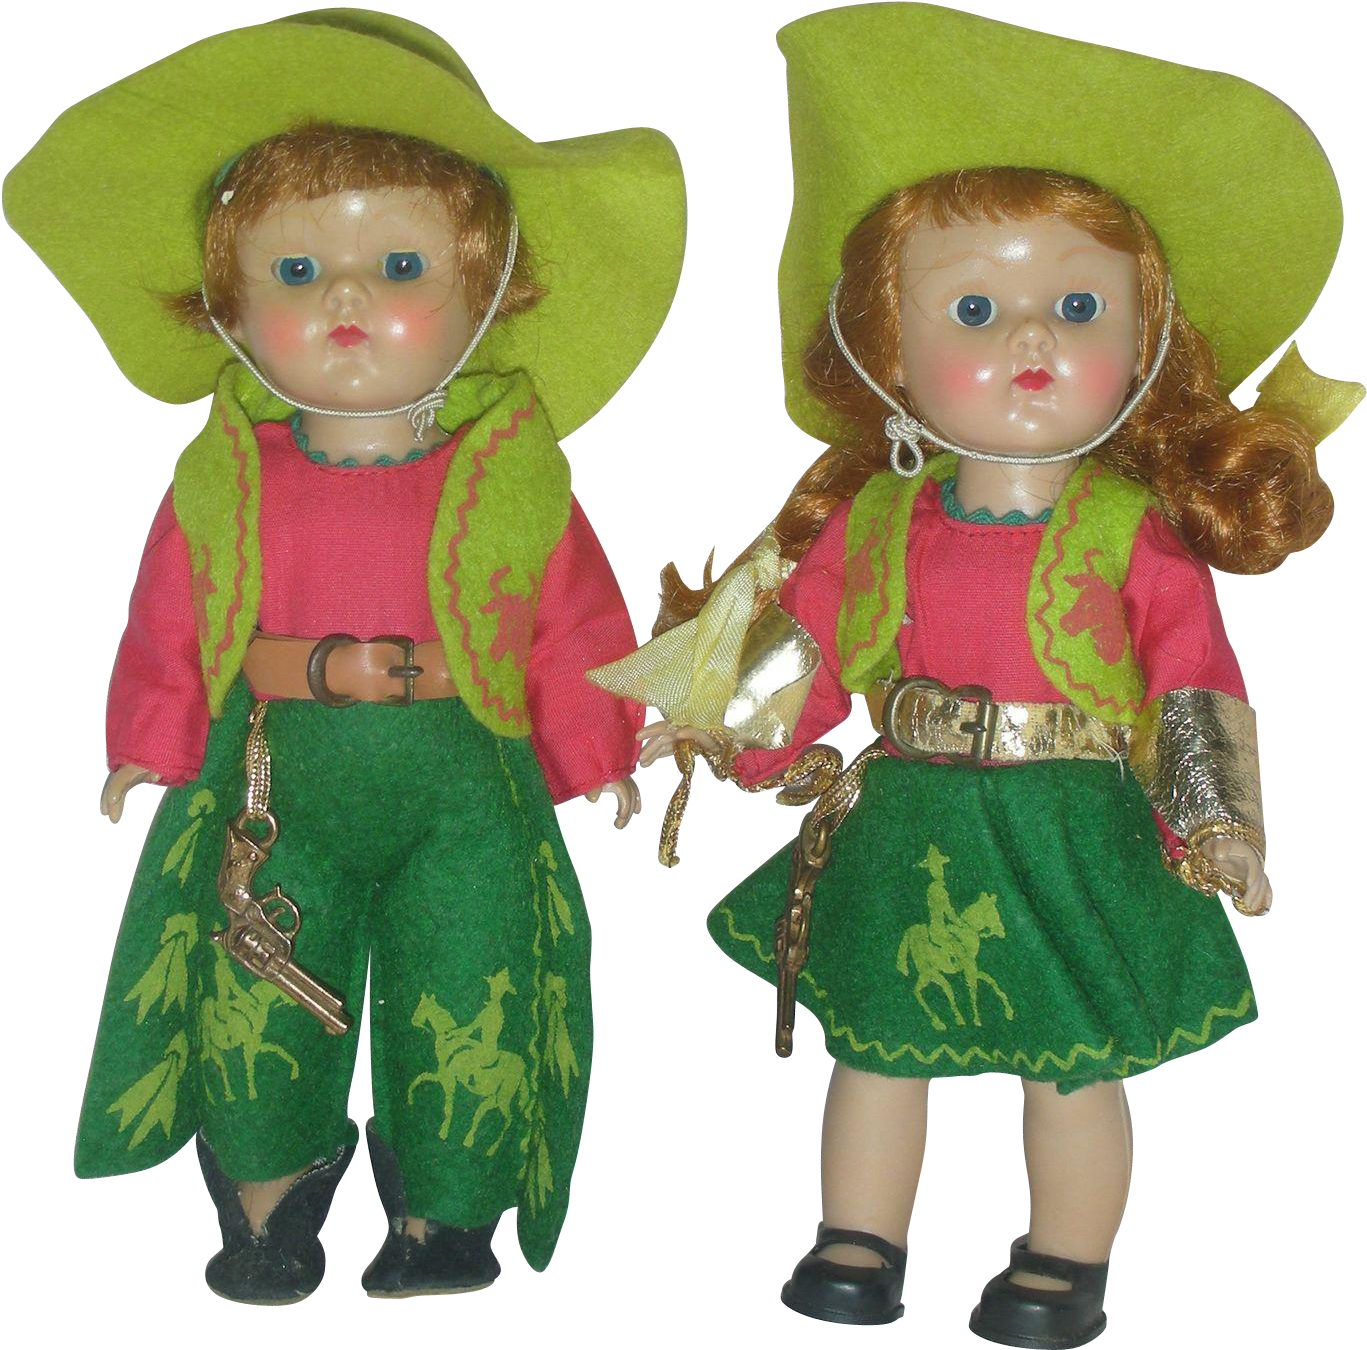 Here Is A Pair Of Vintage 1950s Vogue Ginny Cowgirl - Doll (1366x1366)